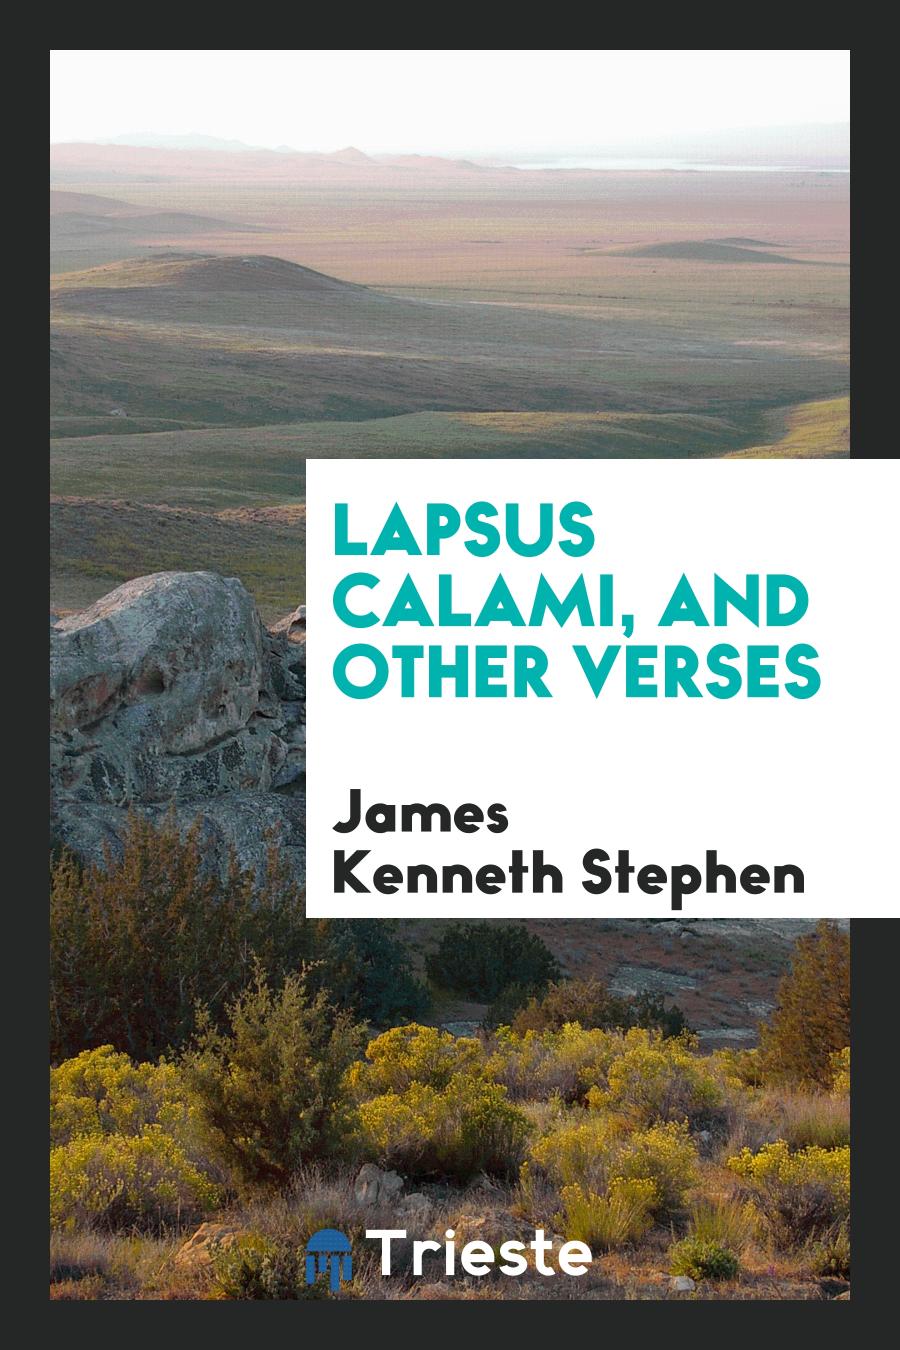 Lapsus calami, and other verses